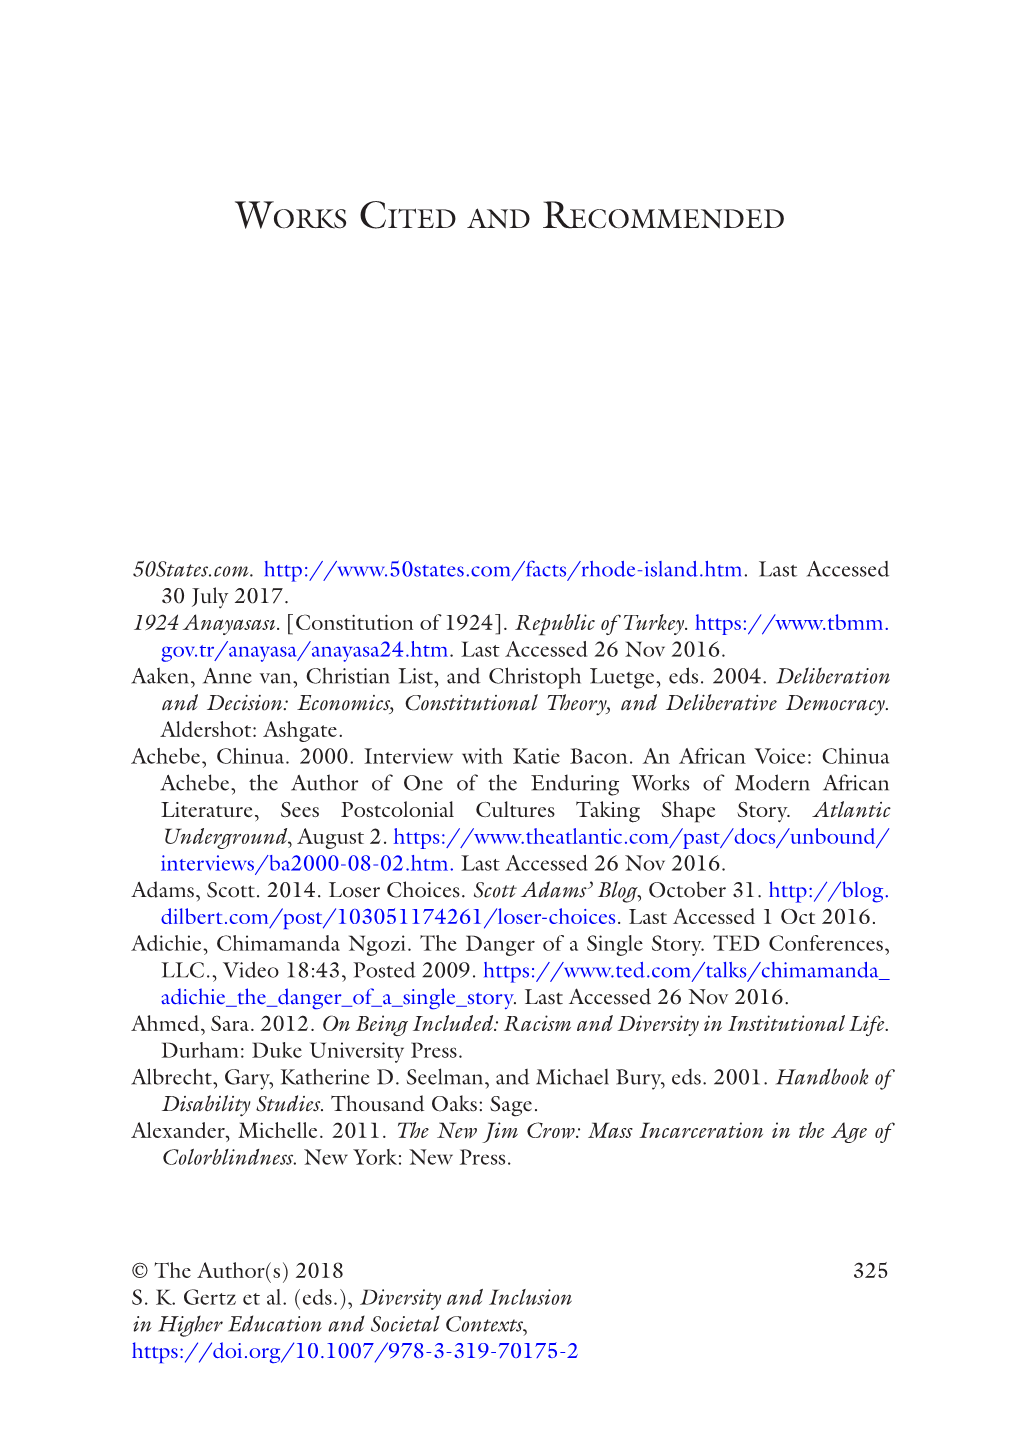 Works Cited and Recommended